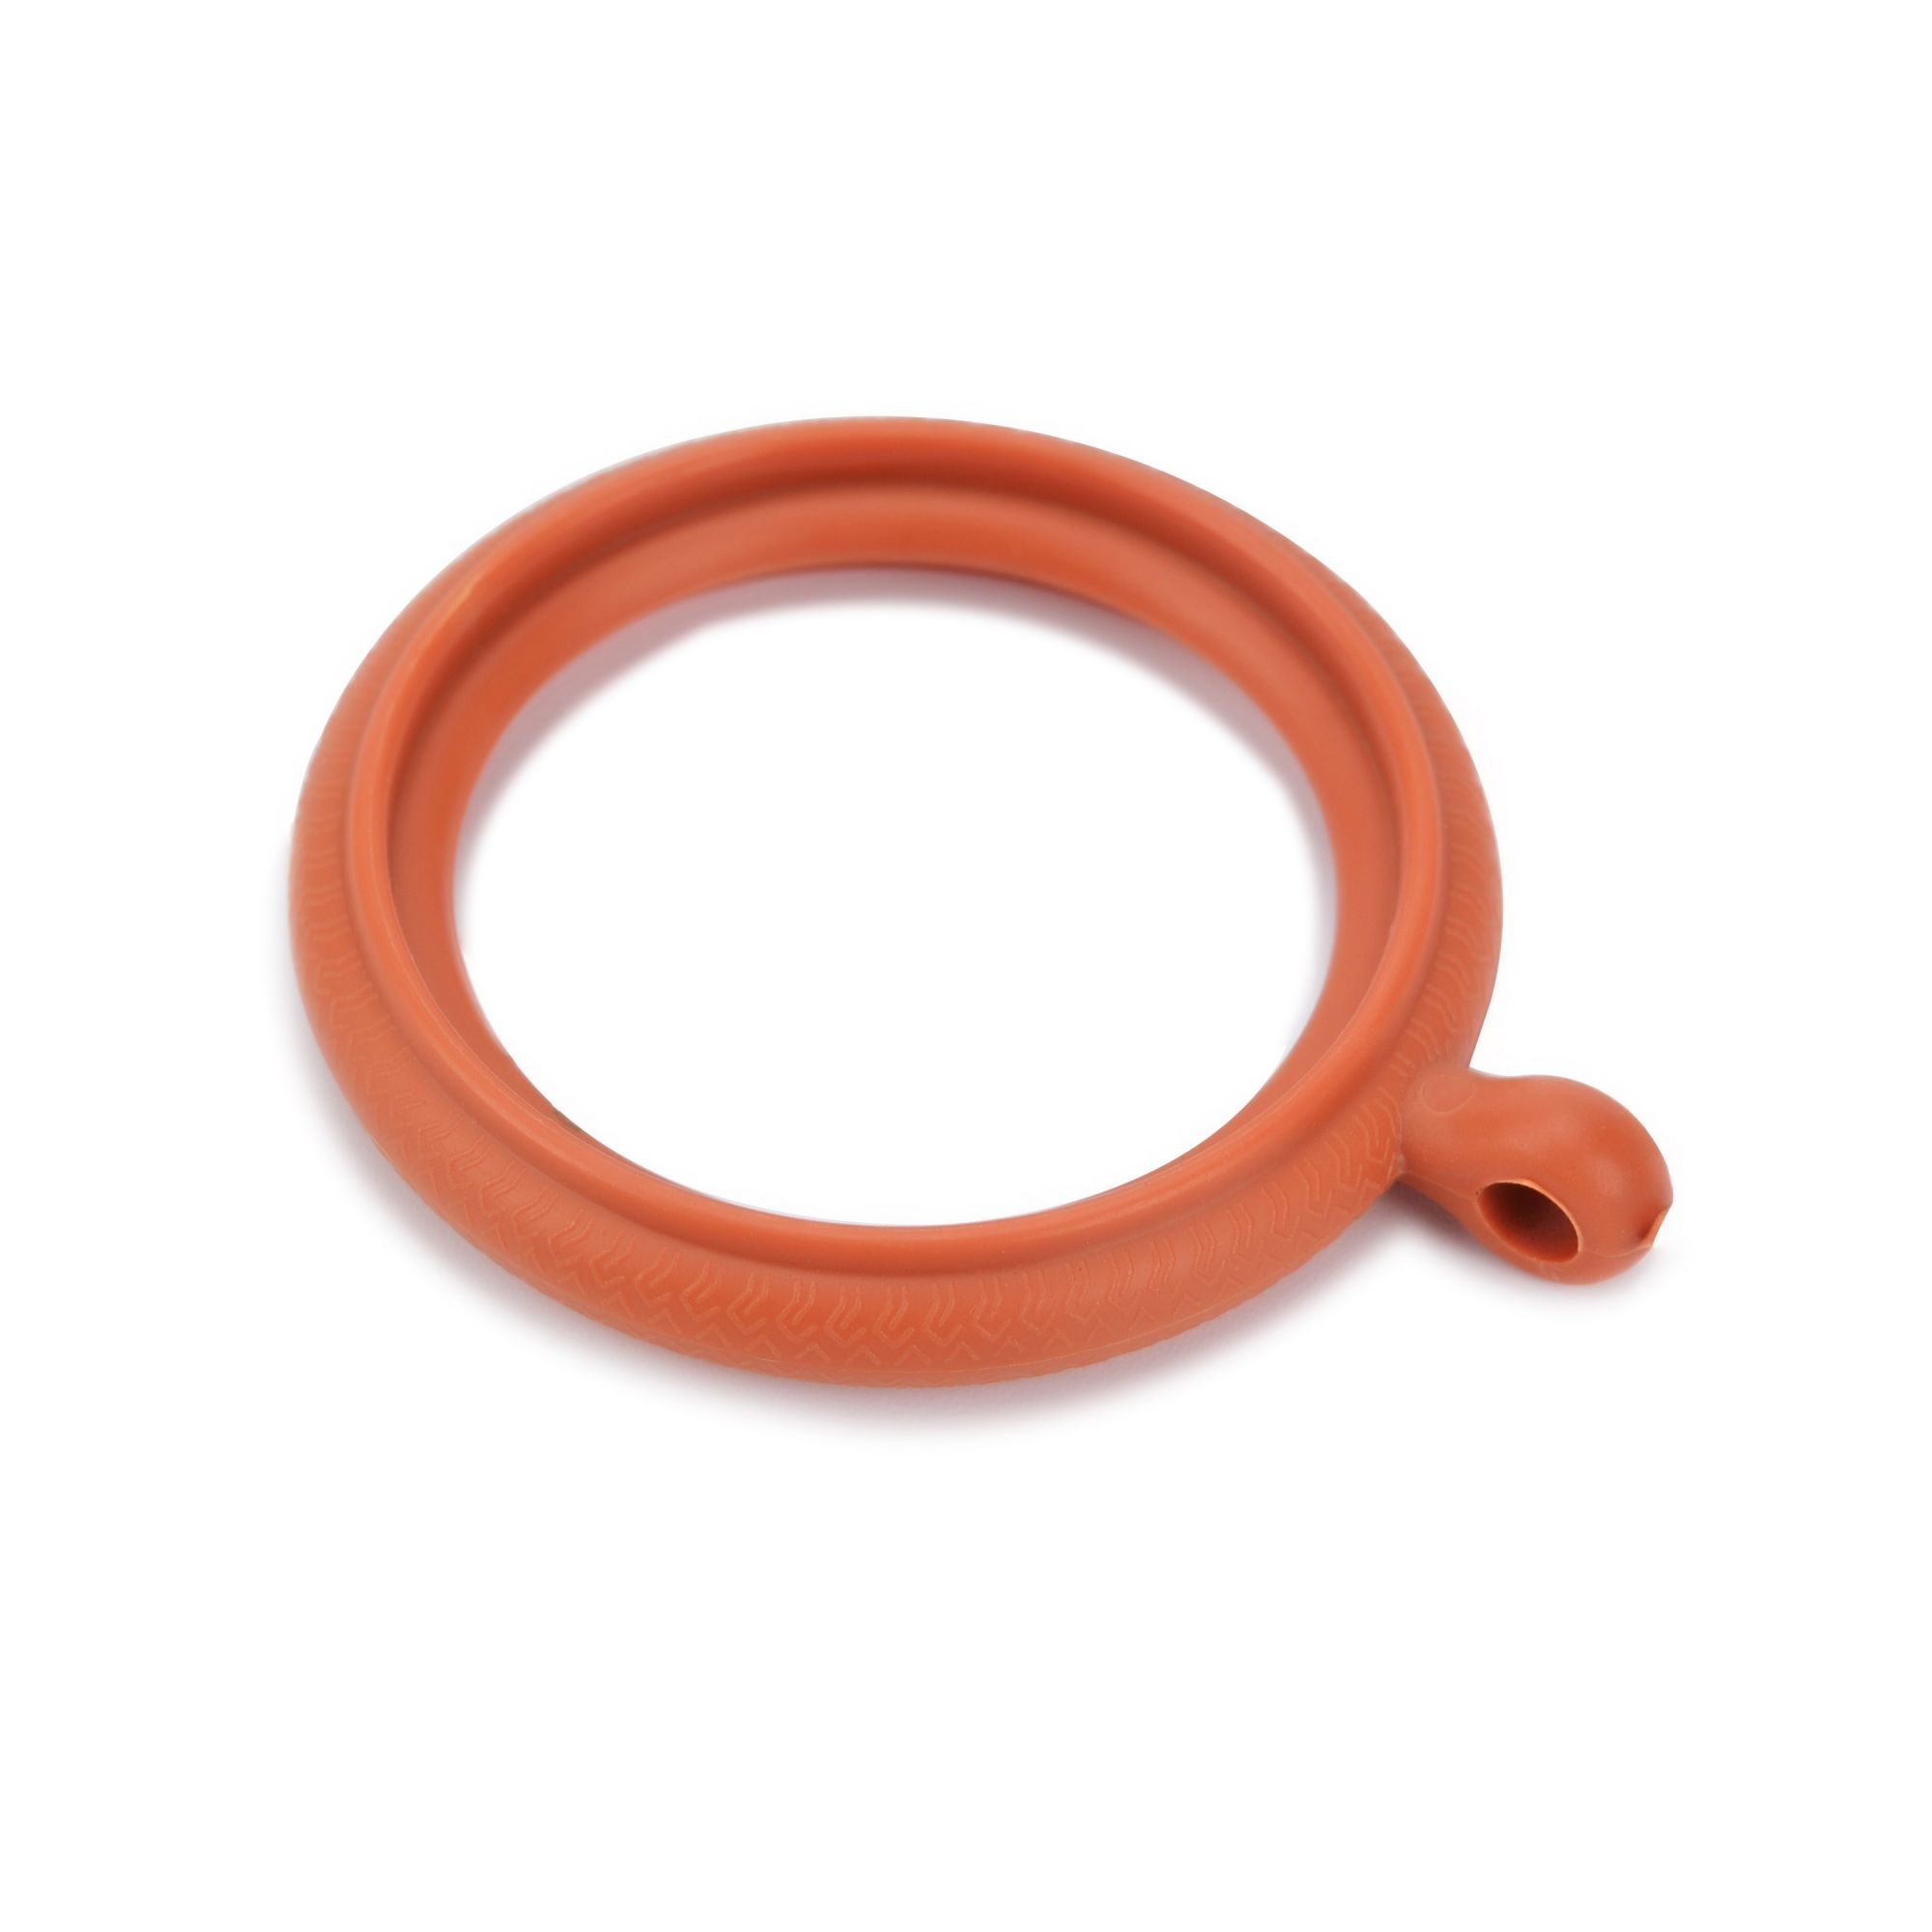 curtain rings with plastic inserts